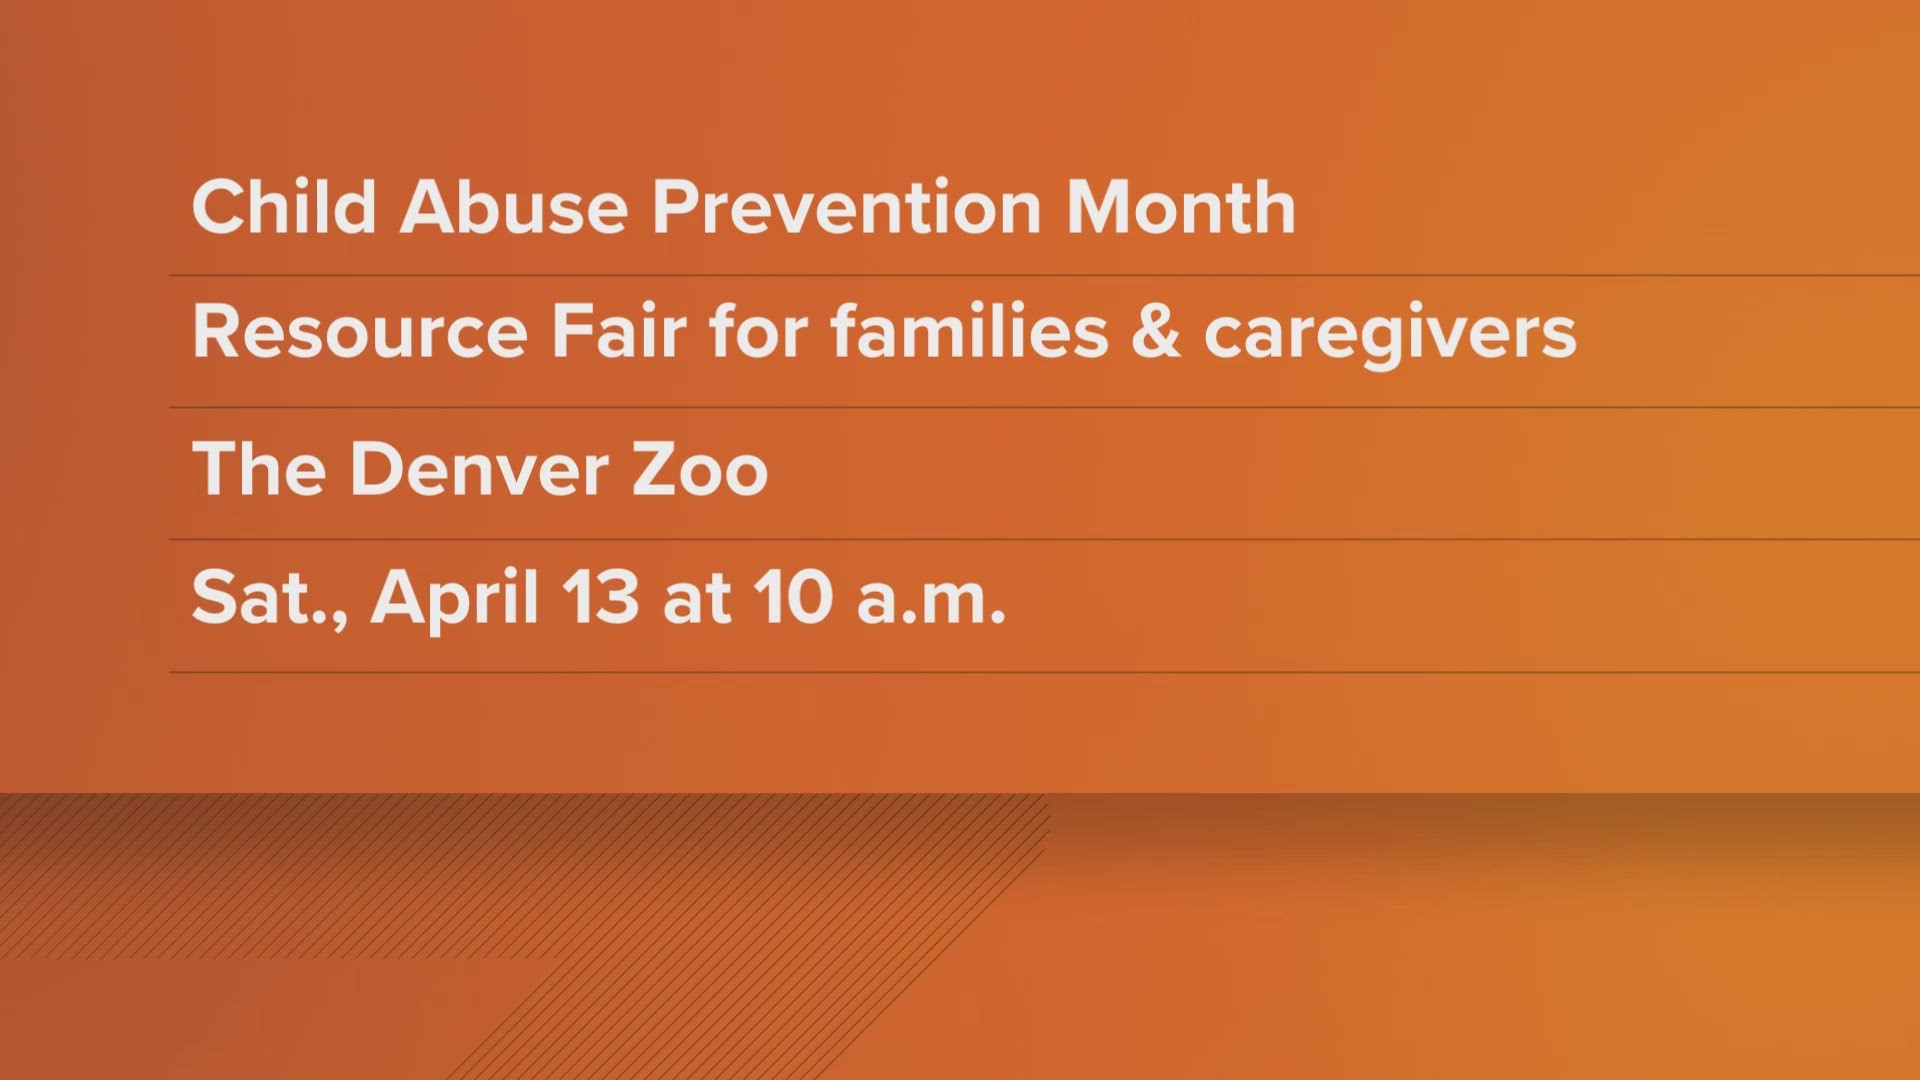 Molly Bradley with the Office of Children, Youth and Families at the Colorado Department of Human Services talks about the event during Child Abuse Awareness Month.